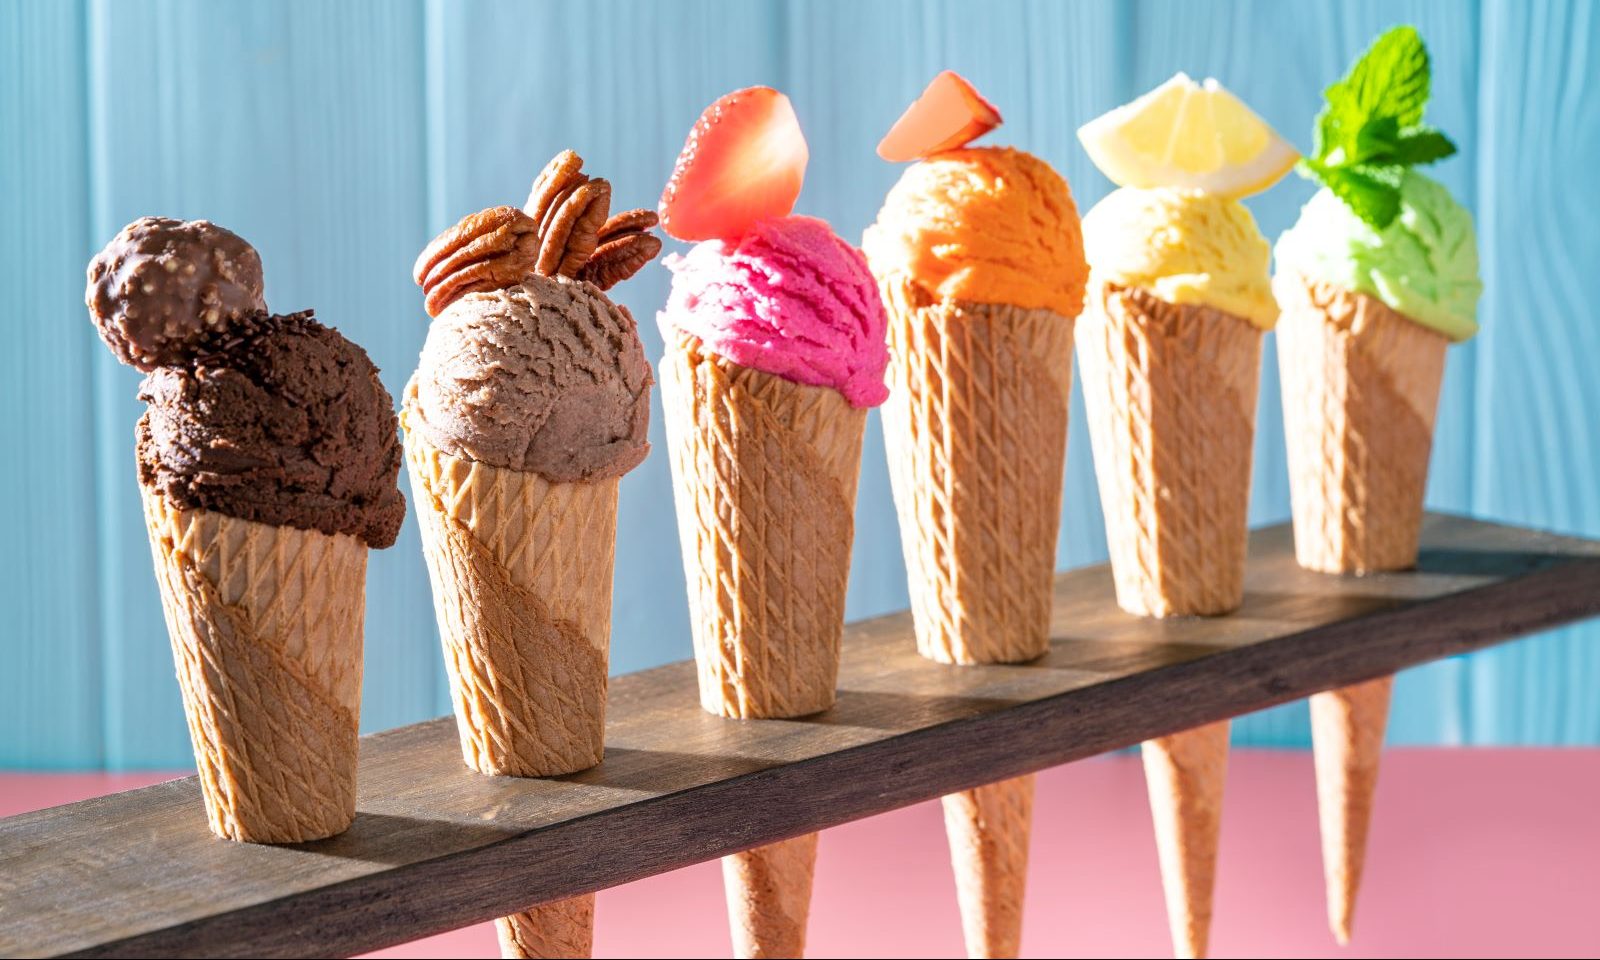 If you're trying to maintain a healthy diet but love ice cream, you may be tempted to switch to an alternative. But does it really matter?